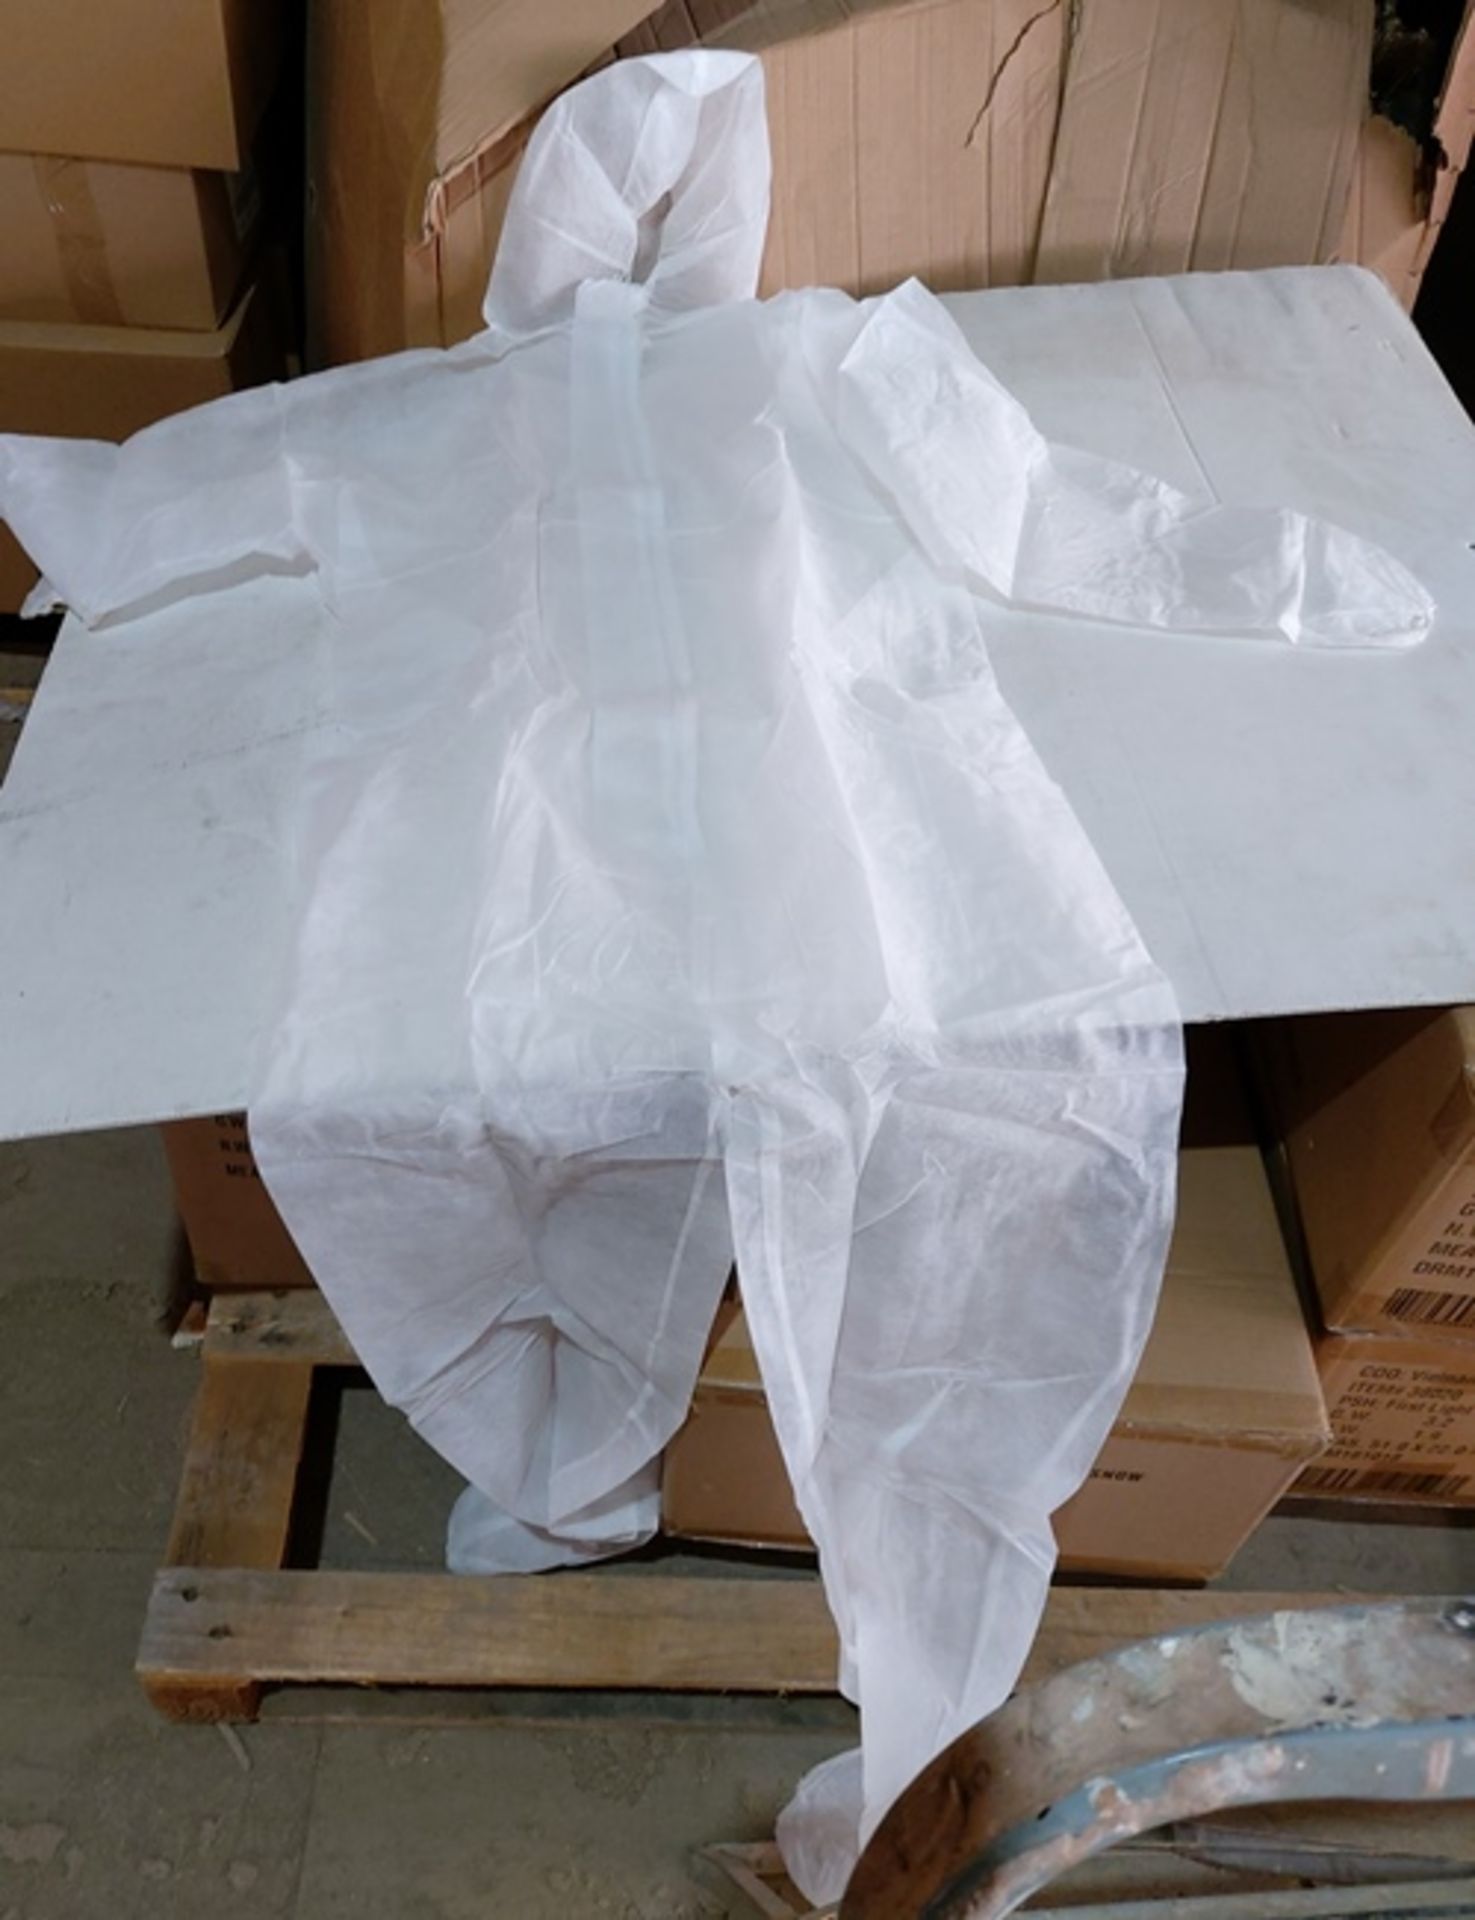 50 x White polypropelene full body coveralls size XXL New in original packaging - Image 2 of 2